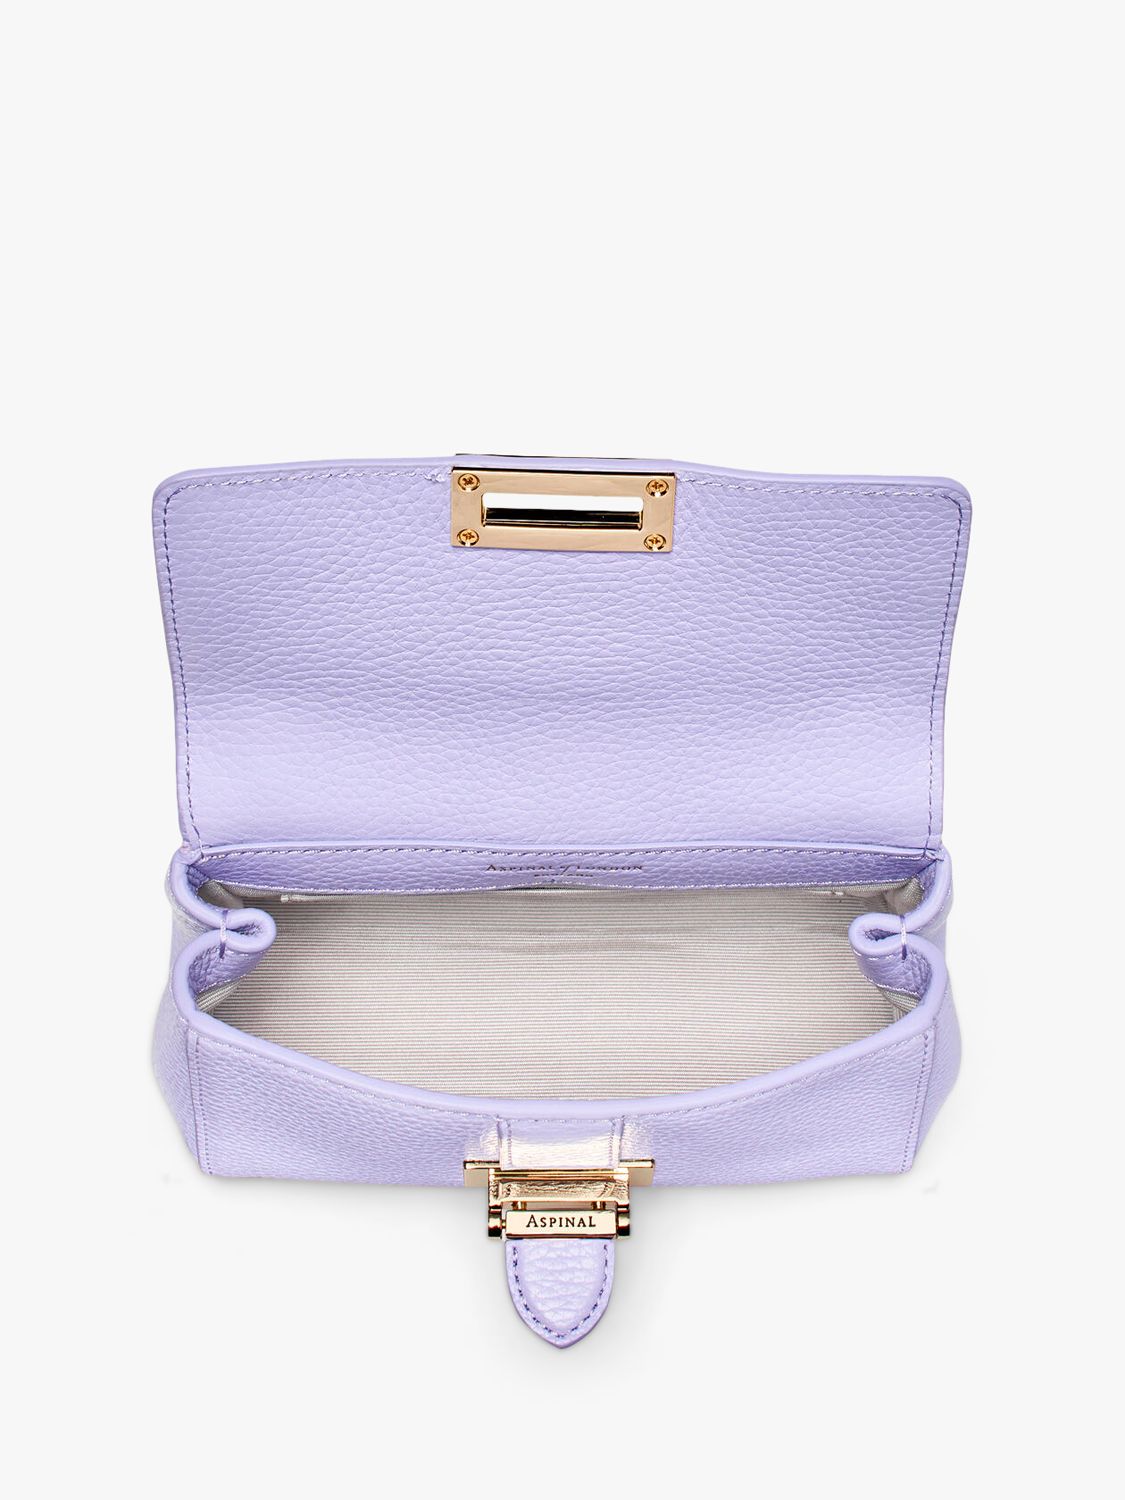 Aspinal of London Lottie Micro Pebble Leather Shoulder Bag, Lavender at ...